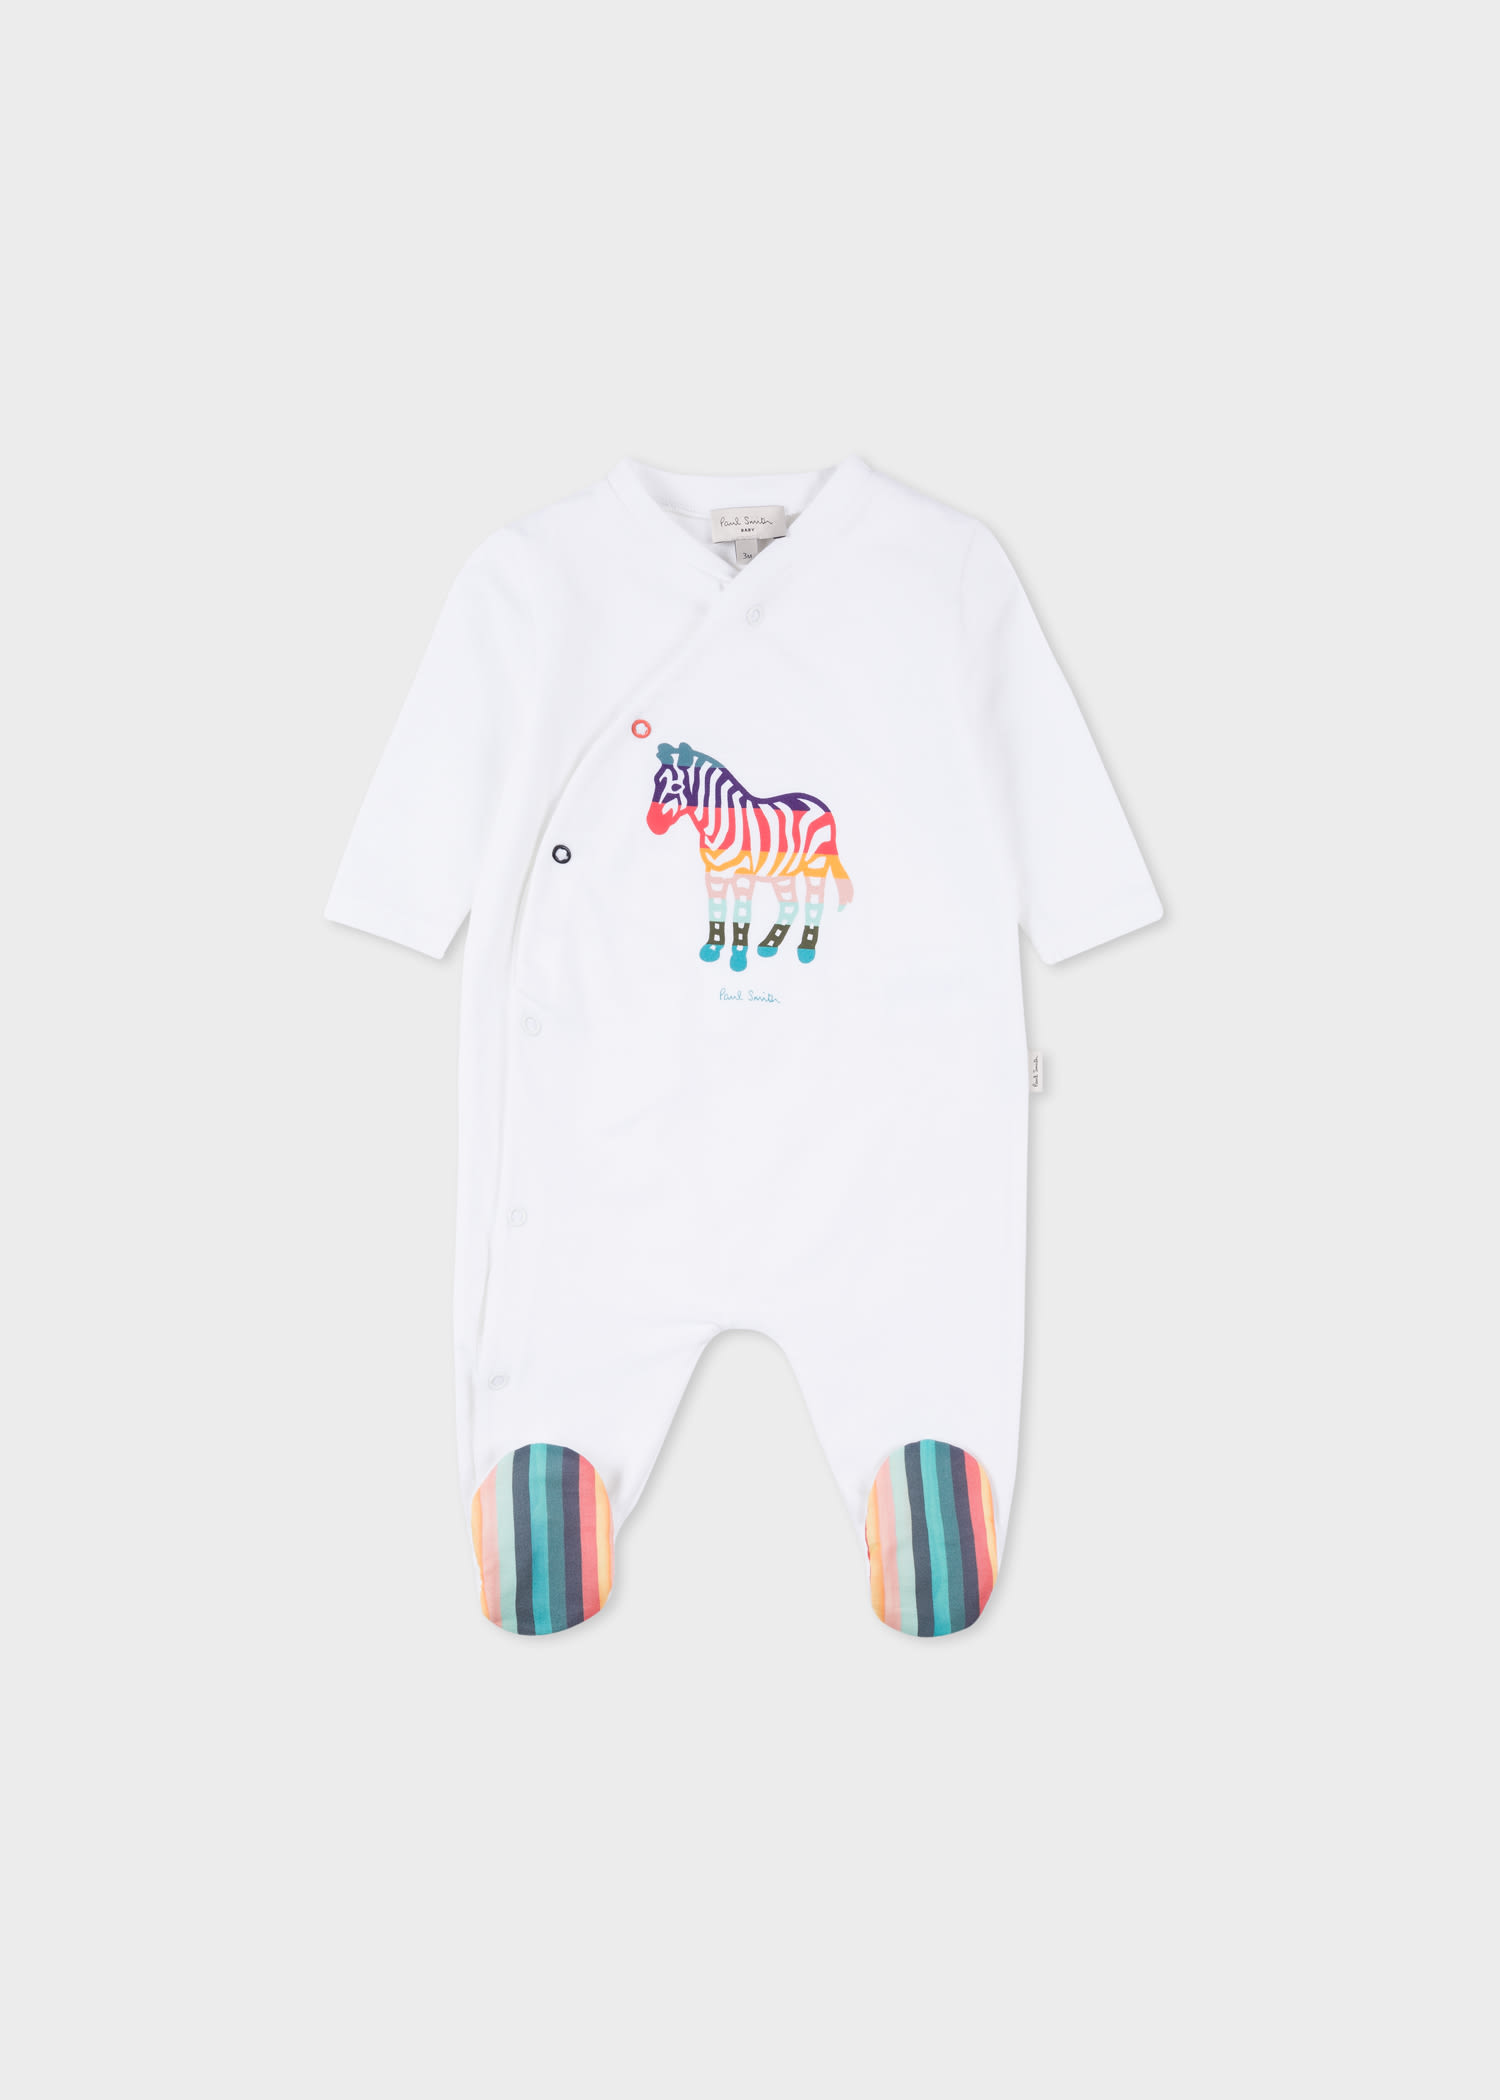 Harden retort Rise Babies' Playwear and Toy Box Set - Paul Smith Asia